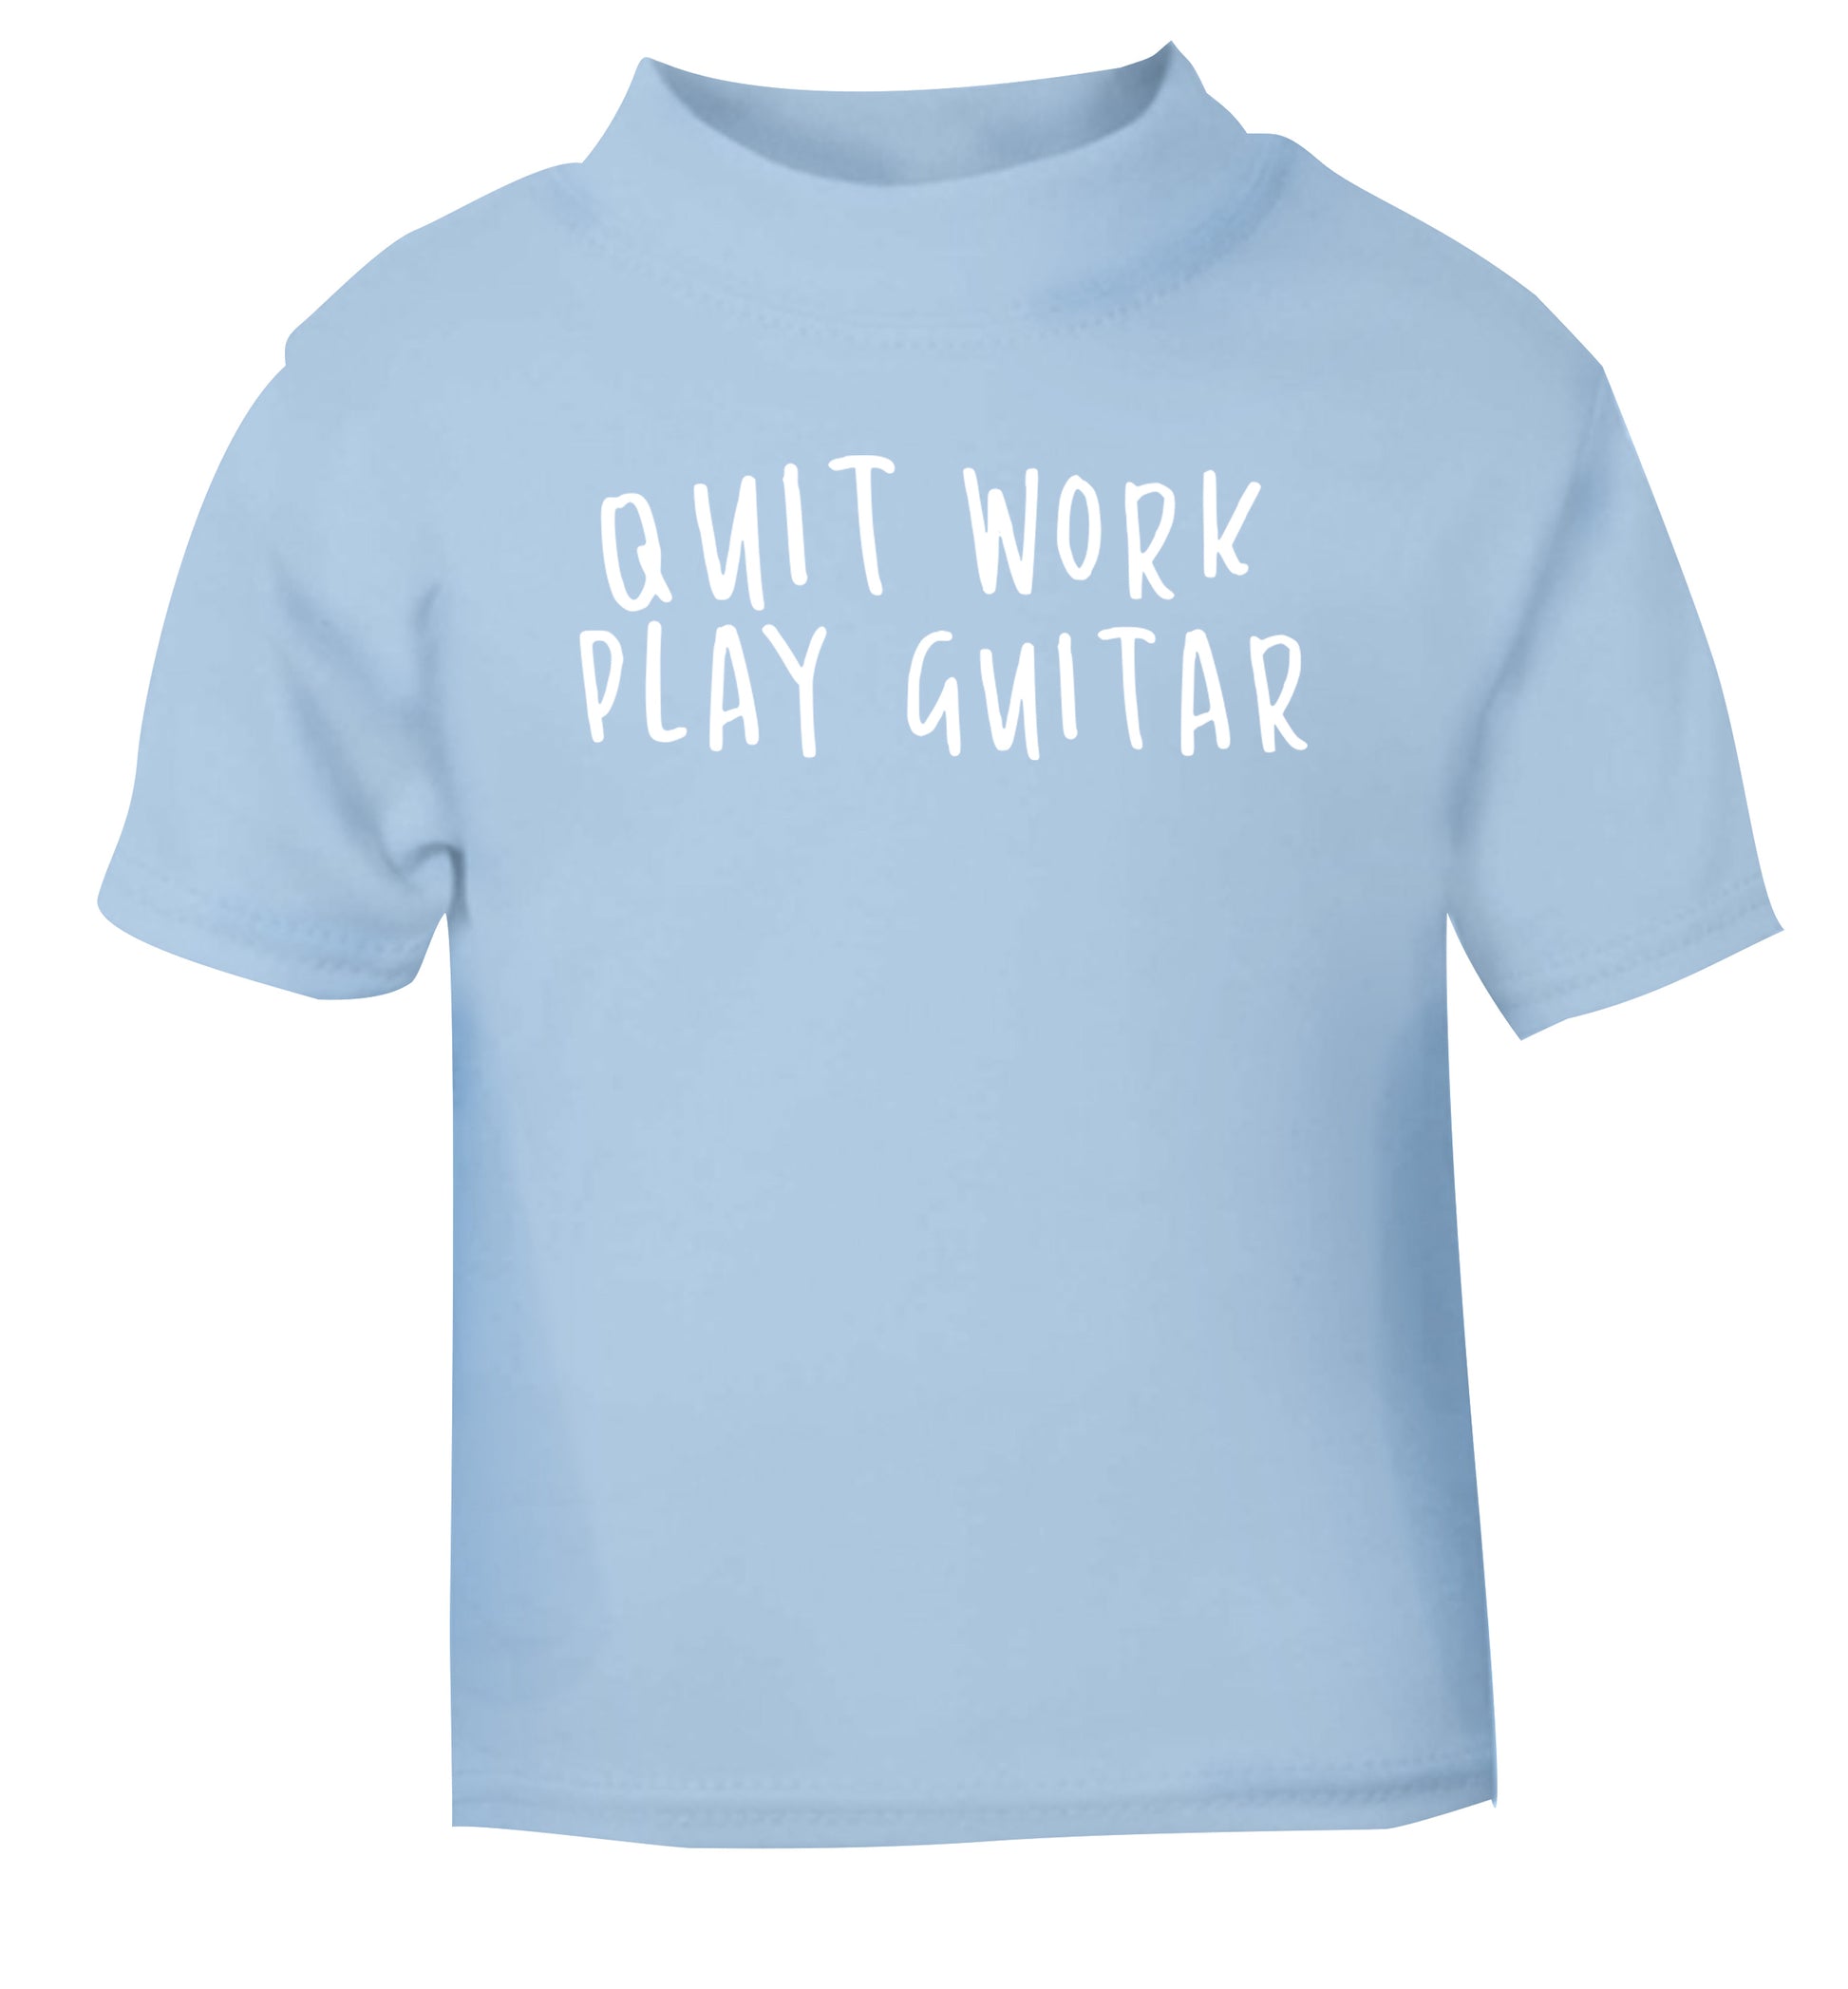 Quit work play guitar light blue Baby Toddler Tshirt 2 Years